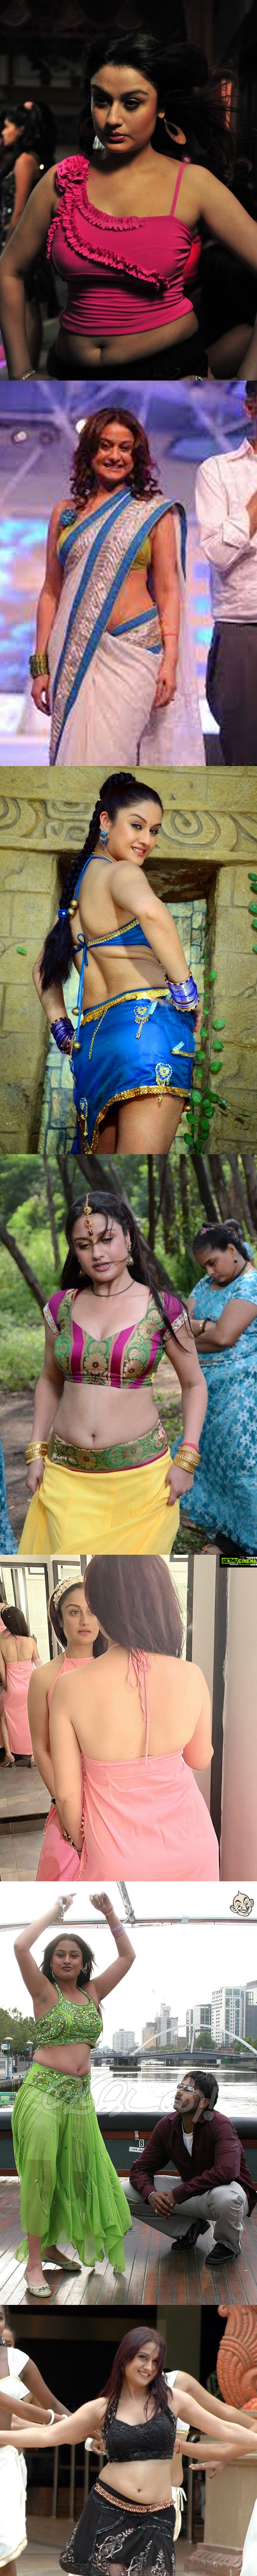 Sonia Agarwal Sex Video - Hot Pics! Here are times South actress Sonia Agarwal raised temperature  with her hot looks